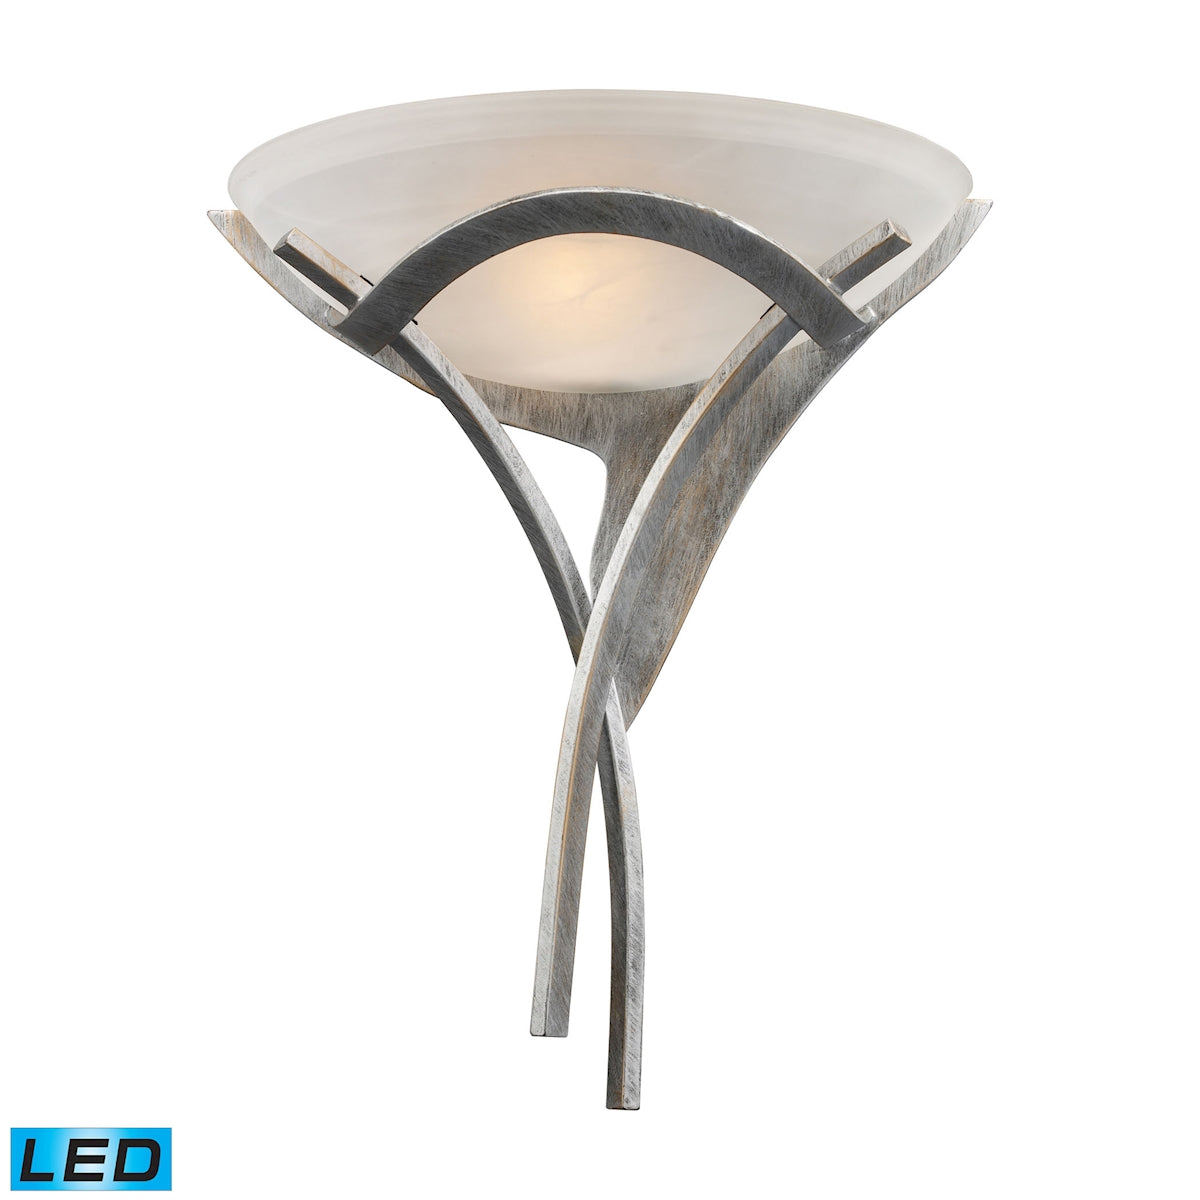 ELK Lighting 001-TS-LED - Aurora 16" Wide 1-Light Sconce in Tarnished Silver with White Faux-Alabast